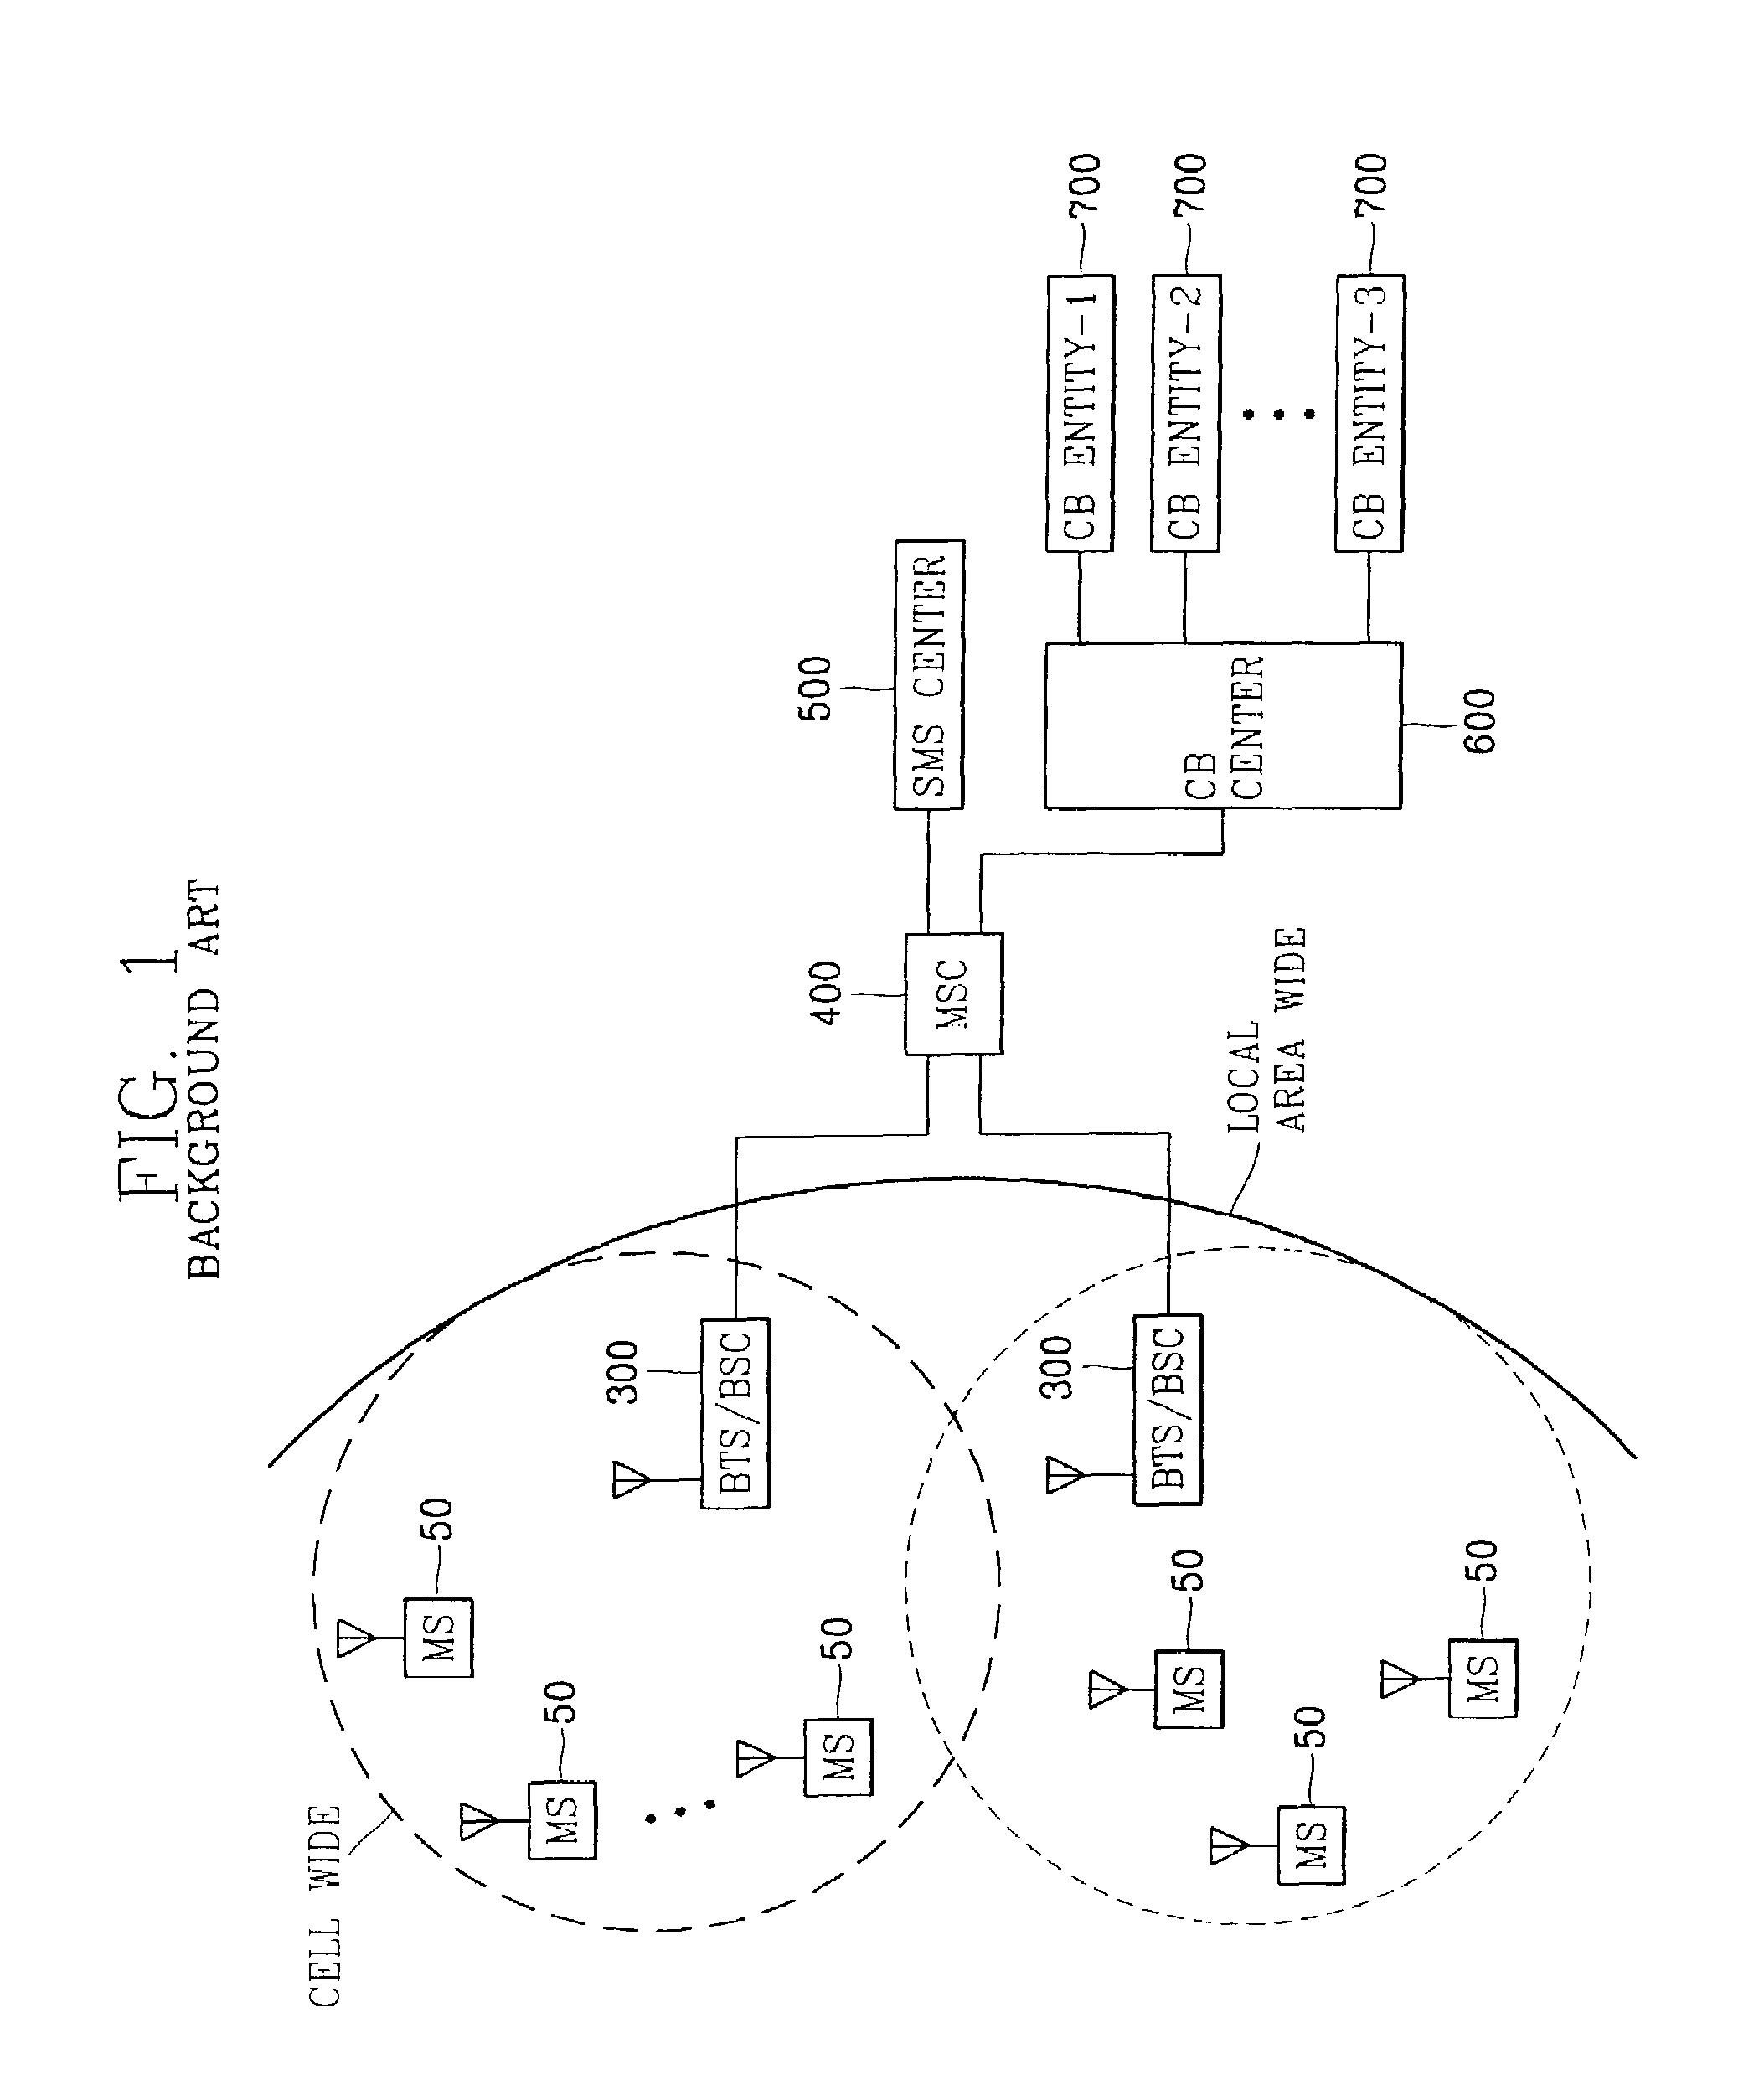 Cell broadcasting service system and method